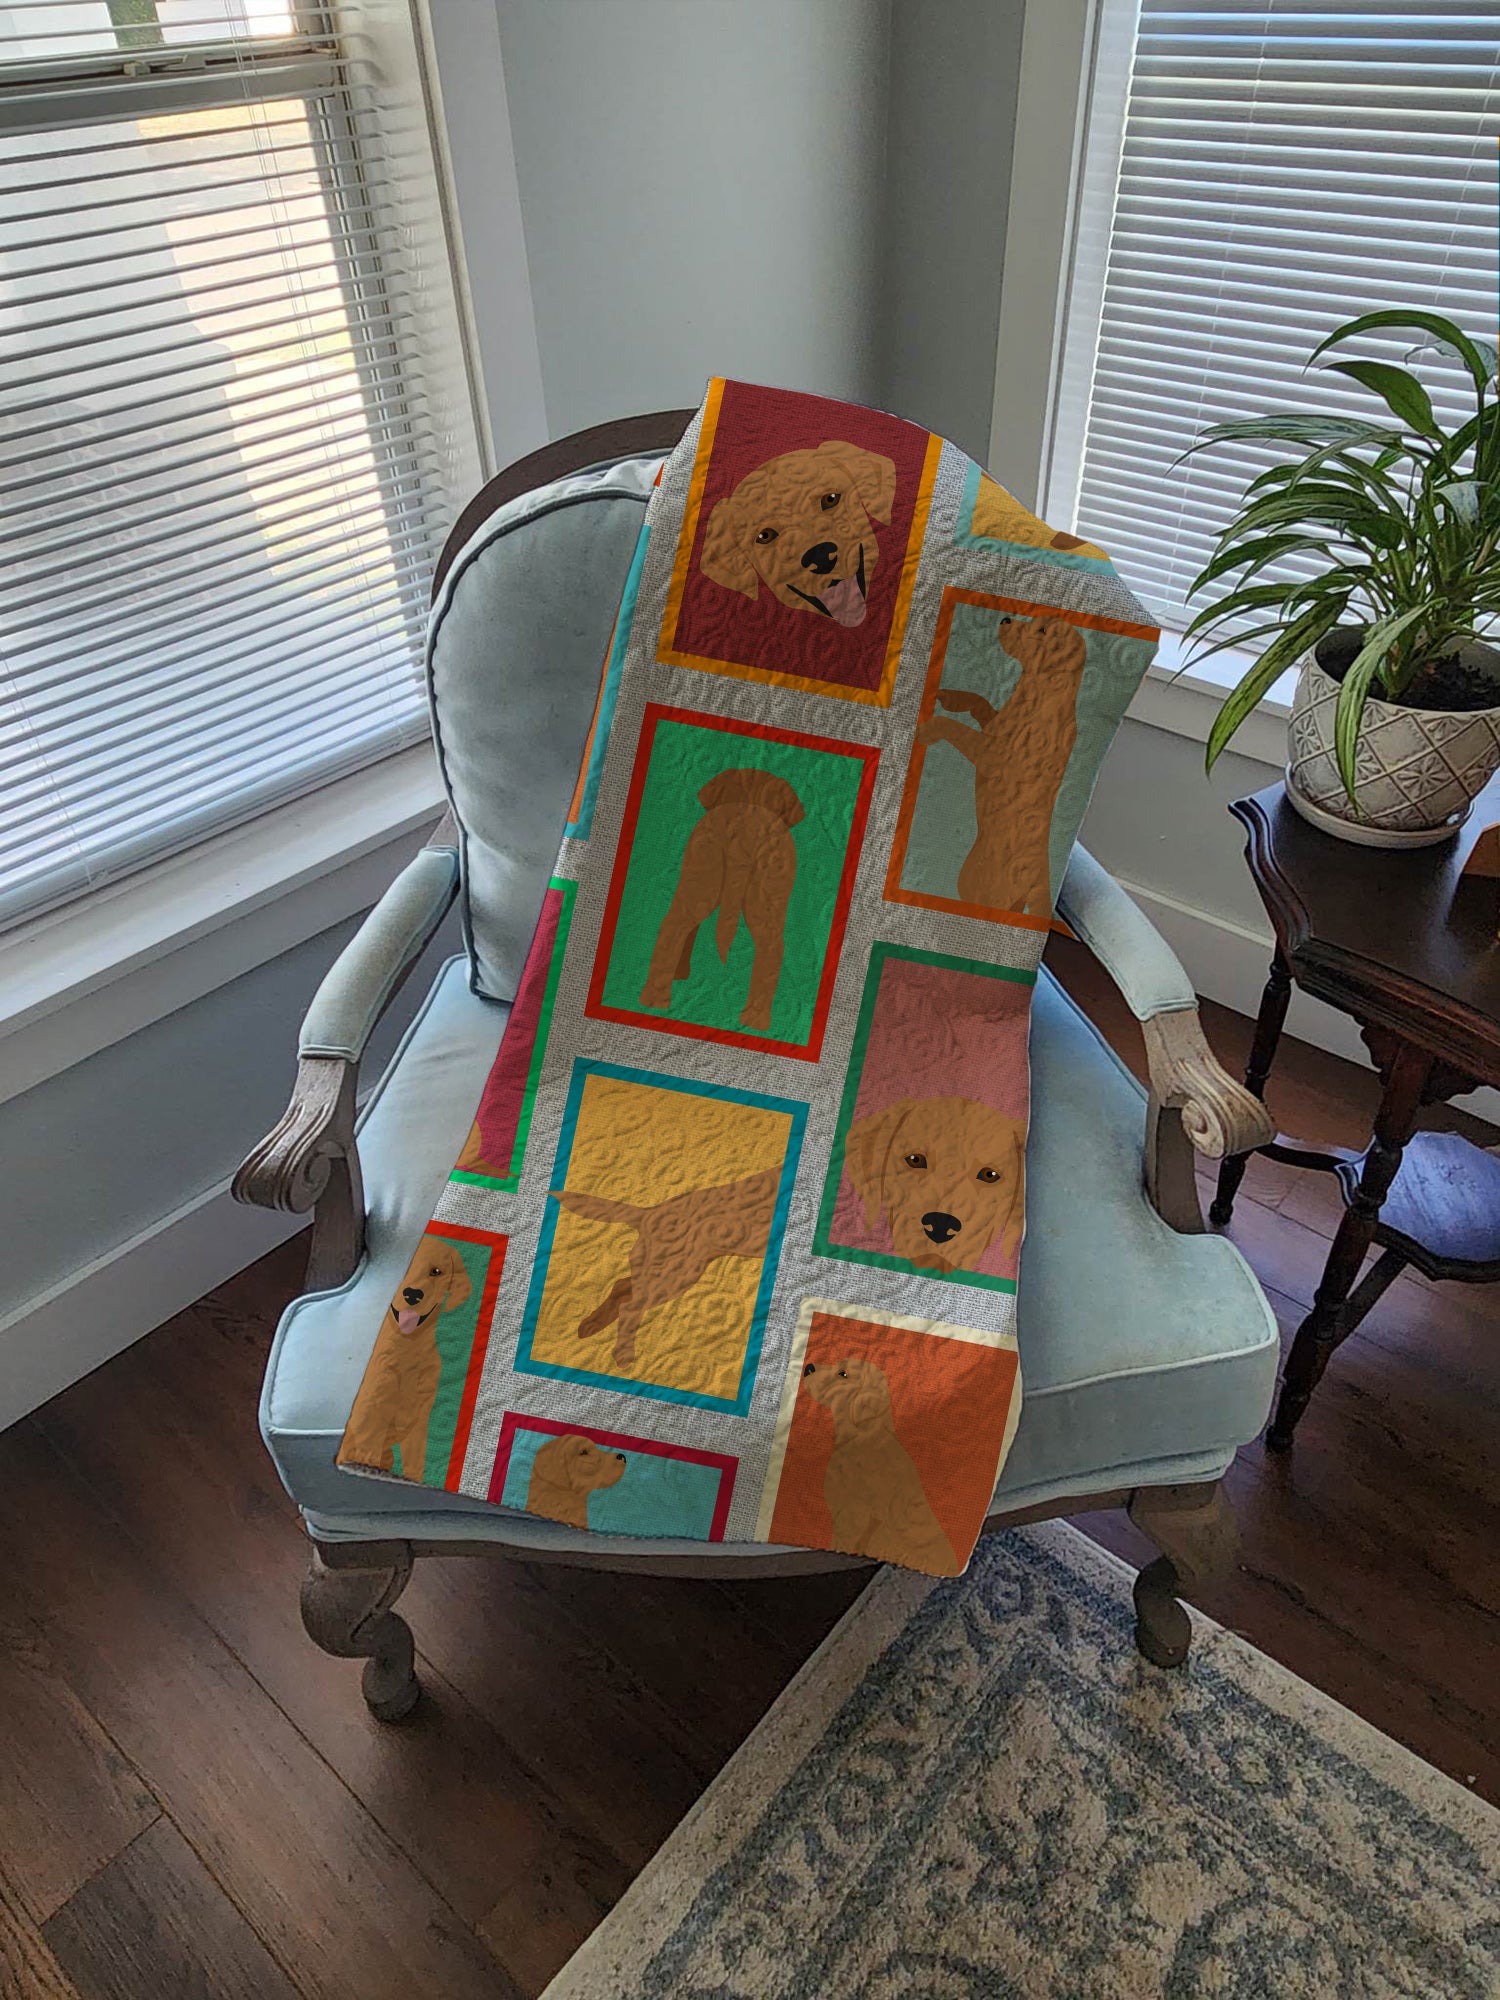 Lots of Red Fox Labrador Retriever Quilted Blanket 50x60 - the-store.com